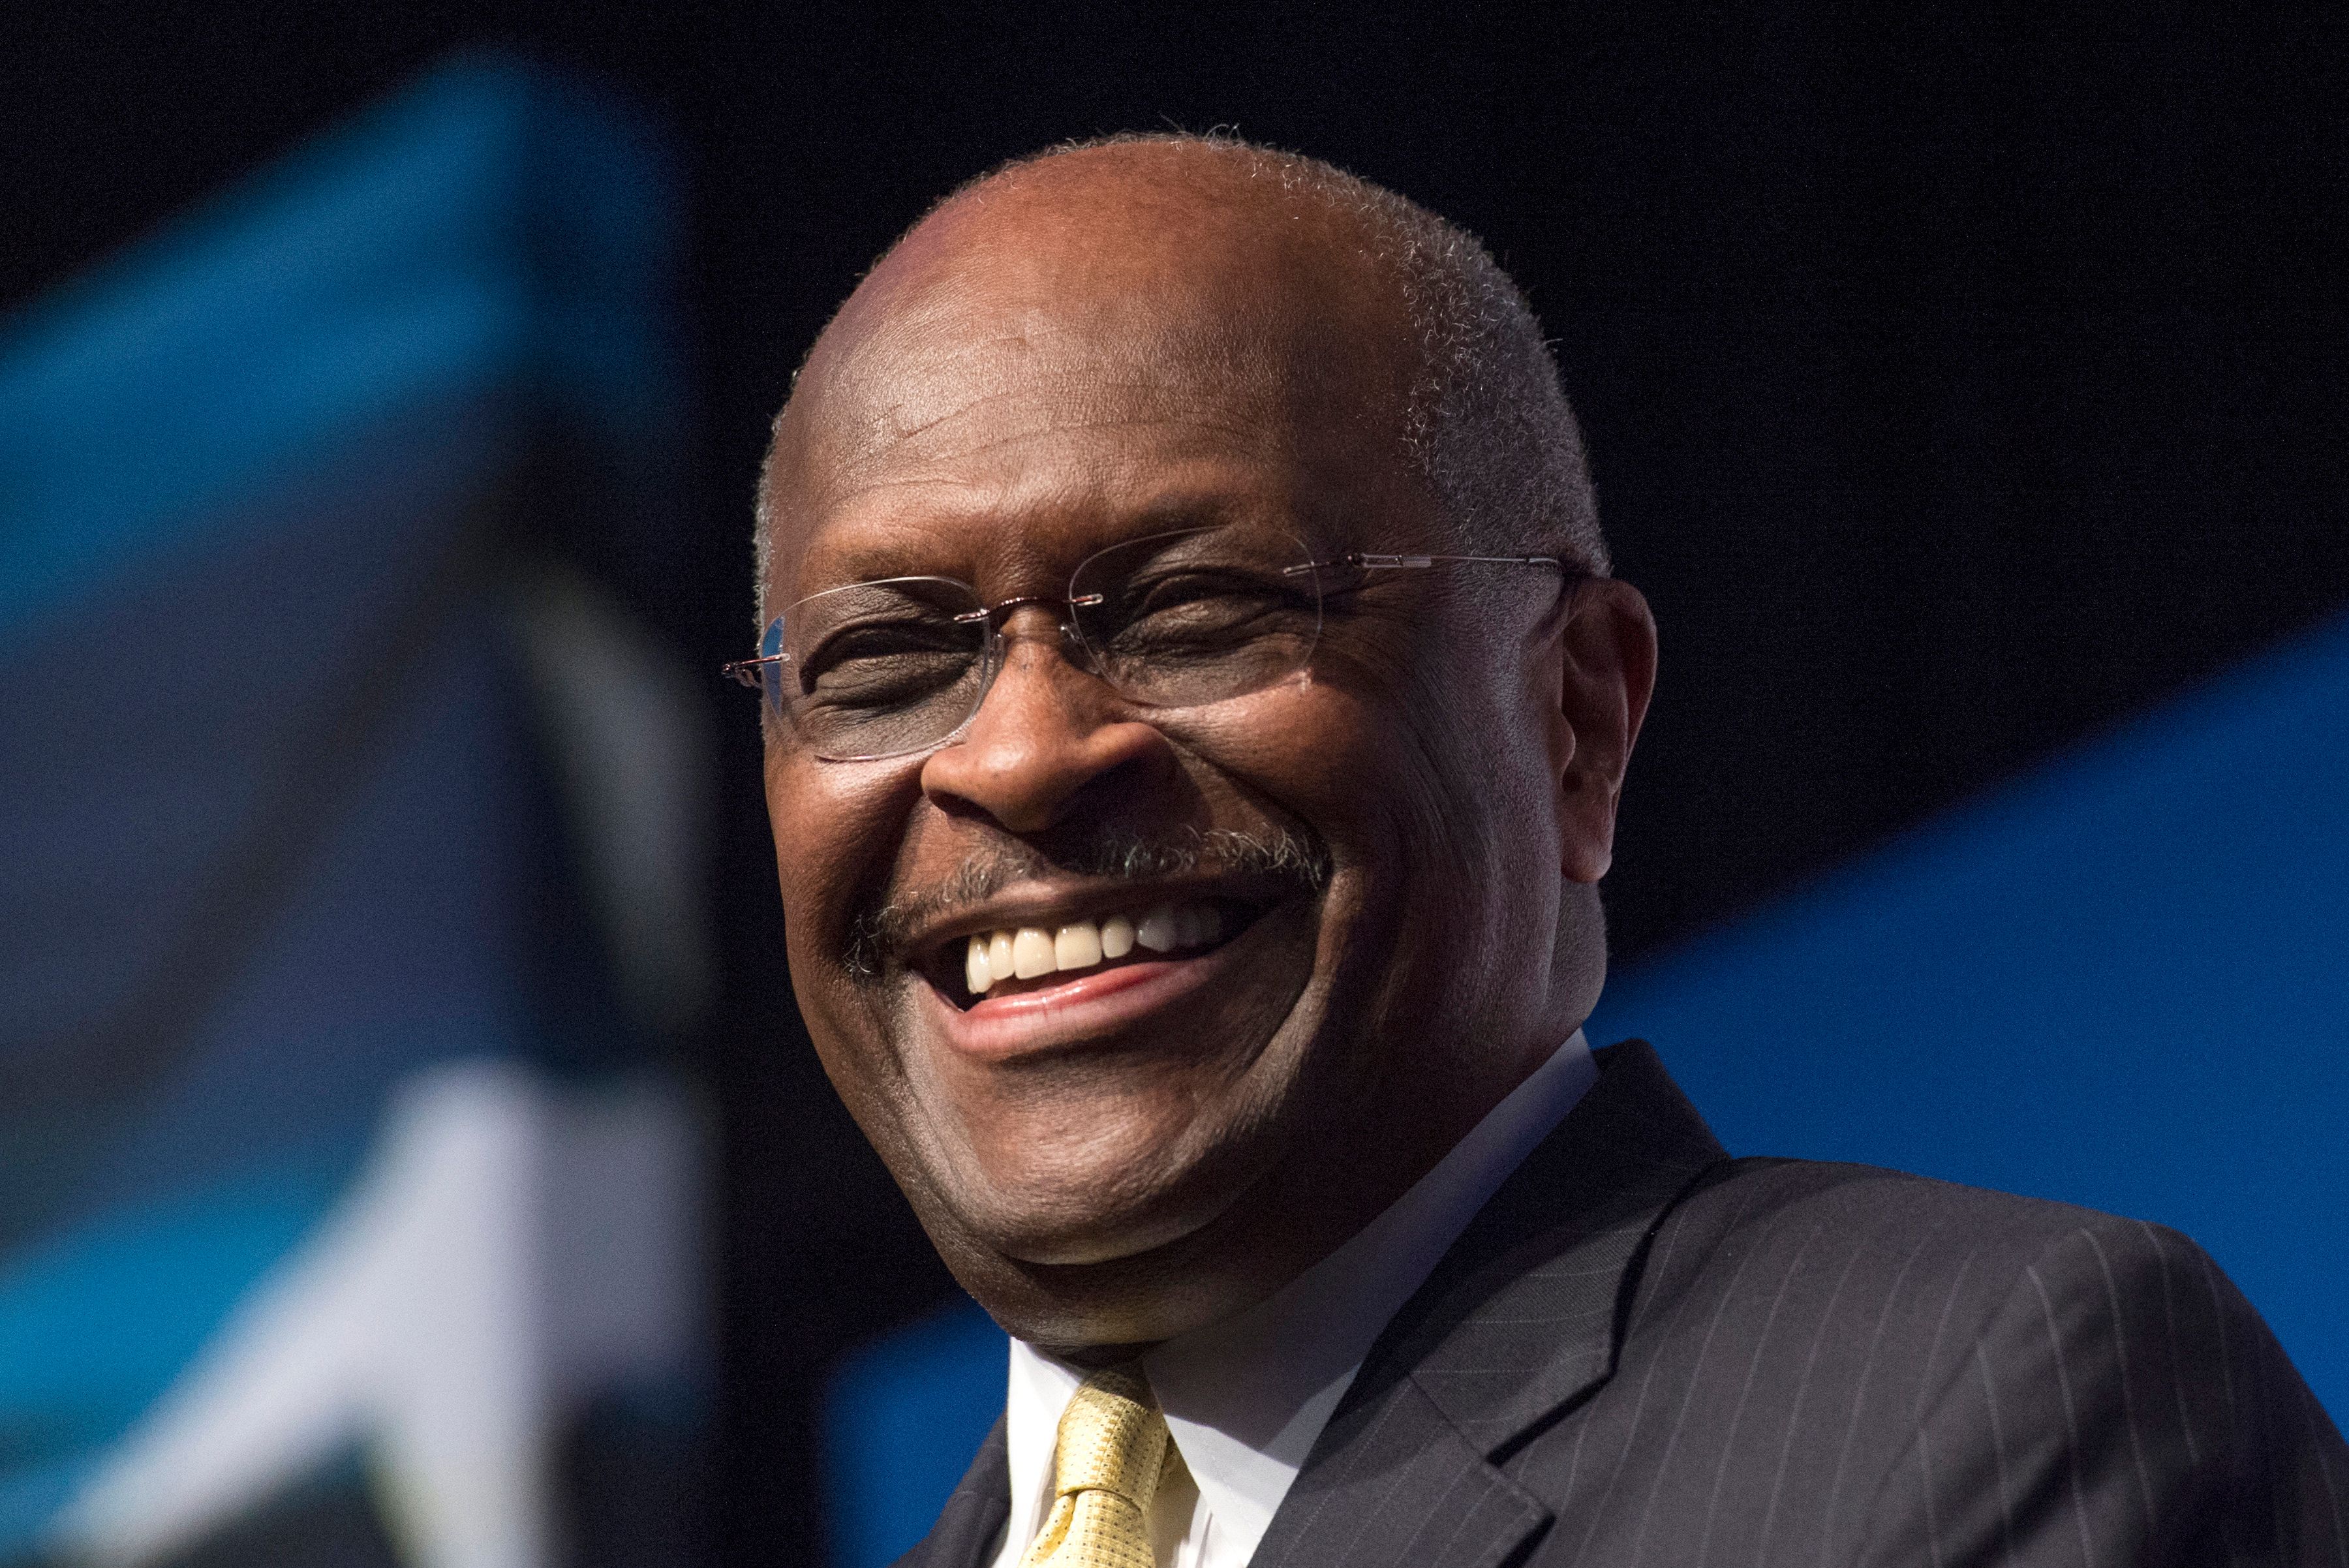 <p>Herman Cain, a former Republican presidential candidate and former CEO of Godfather's Pizza, died from complications of COVID-19, his website announced on July 30. The co-chair of Black Voices for Trump and contributor for conservative media outlet Newsmax was 74. "We knew when he was first <a href="https://www.wonderwall.com/celebrity/photos/famous-people-who-have-tested-positive-coronavirus-covid-19-3022493.gallery">hospitalized with COVID-19</a> [in early July] that this was going to be a rough fight. He had trouble breathing and was taken to the hospital by ambulance. We all prayed that the initial meds they gave him would get his breathing back to normal, but it became clear pretty quickly that he was in for a battle," HermanCain.com editor Dan Calabrese wrote. "There were hopeful indicators, including a mere five days ago when doctors told us they thought he would eventually recover, although it wouldn't be quick. … I'm sorry I had to bring you bad news this morning. But the good news is that we had a man so good, so solid, so full of love and faith ... that his death hits us this hard. Thank God for a man like that." </p>